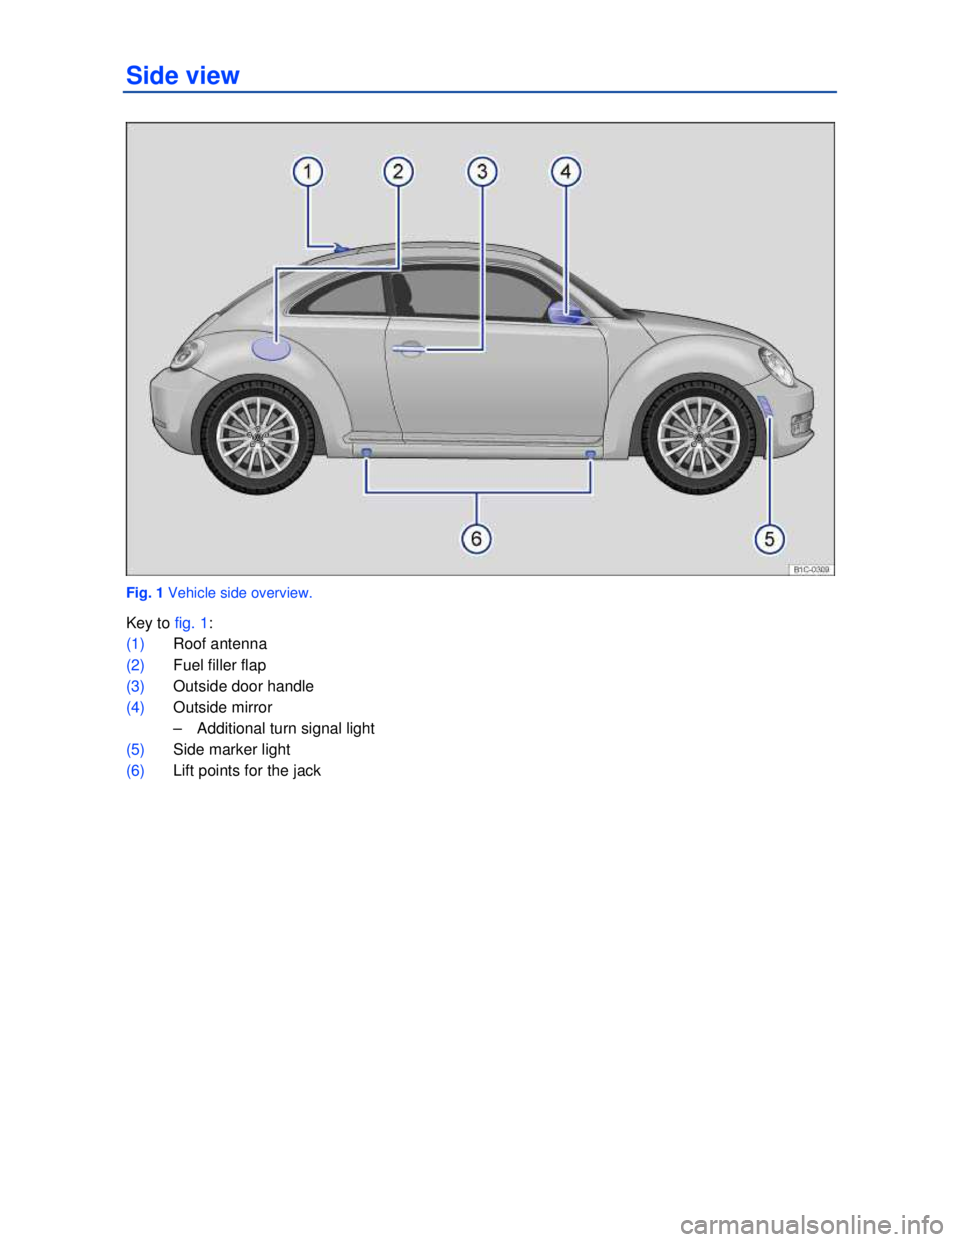 VOLKSWAGEN BEETLE 2012  Owners Manual  
Side view 
 
Fig. 1 Vehicle side overview. 
Key to fig. 1: 
(1) Roof antenna  
(2) Fuel filler flap  
(3) Outside door handle  
(4) Outside mirror  
–  Additional turn signal light  
(5) Side mark